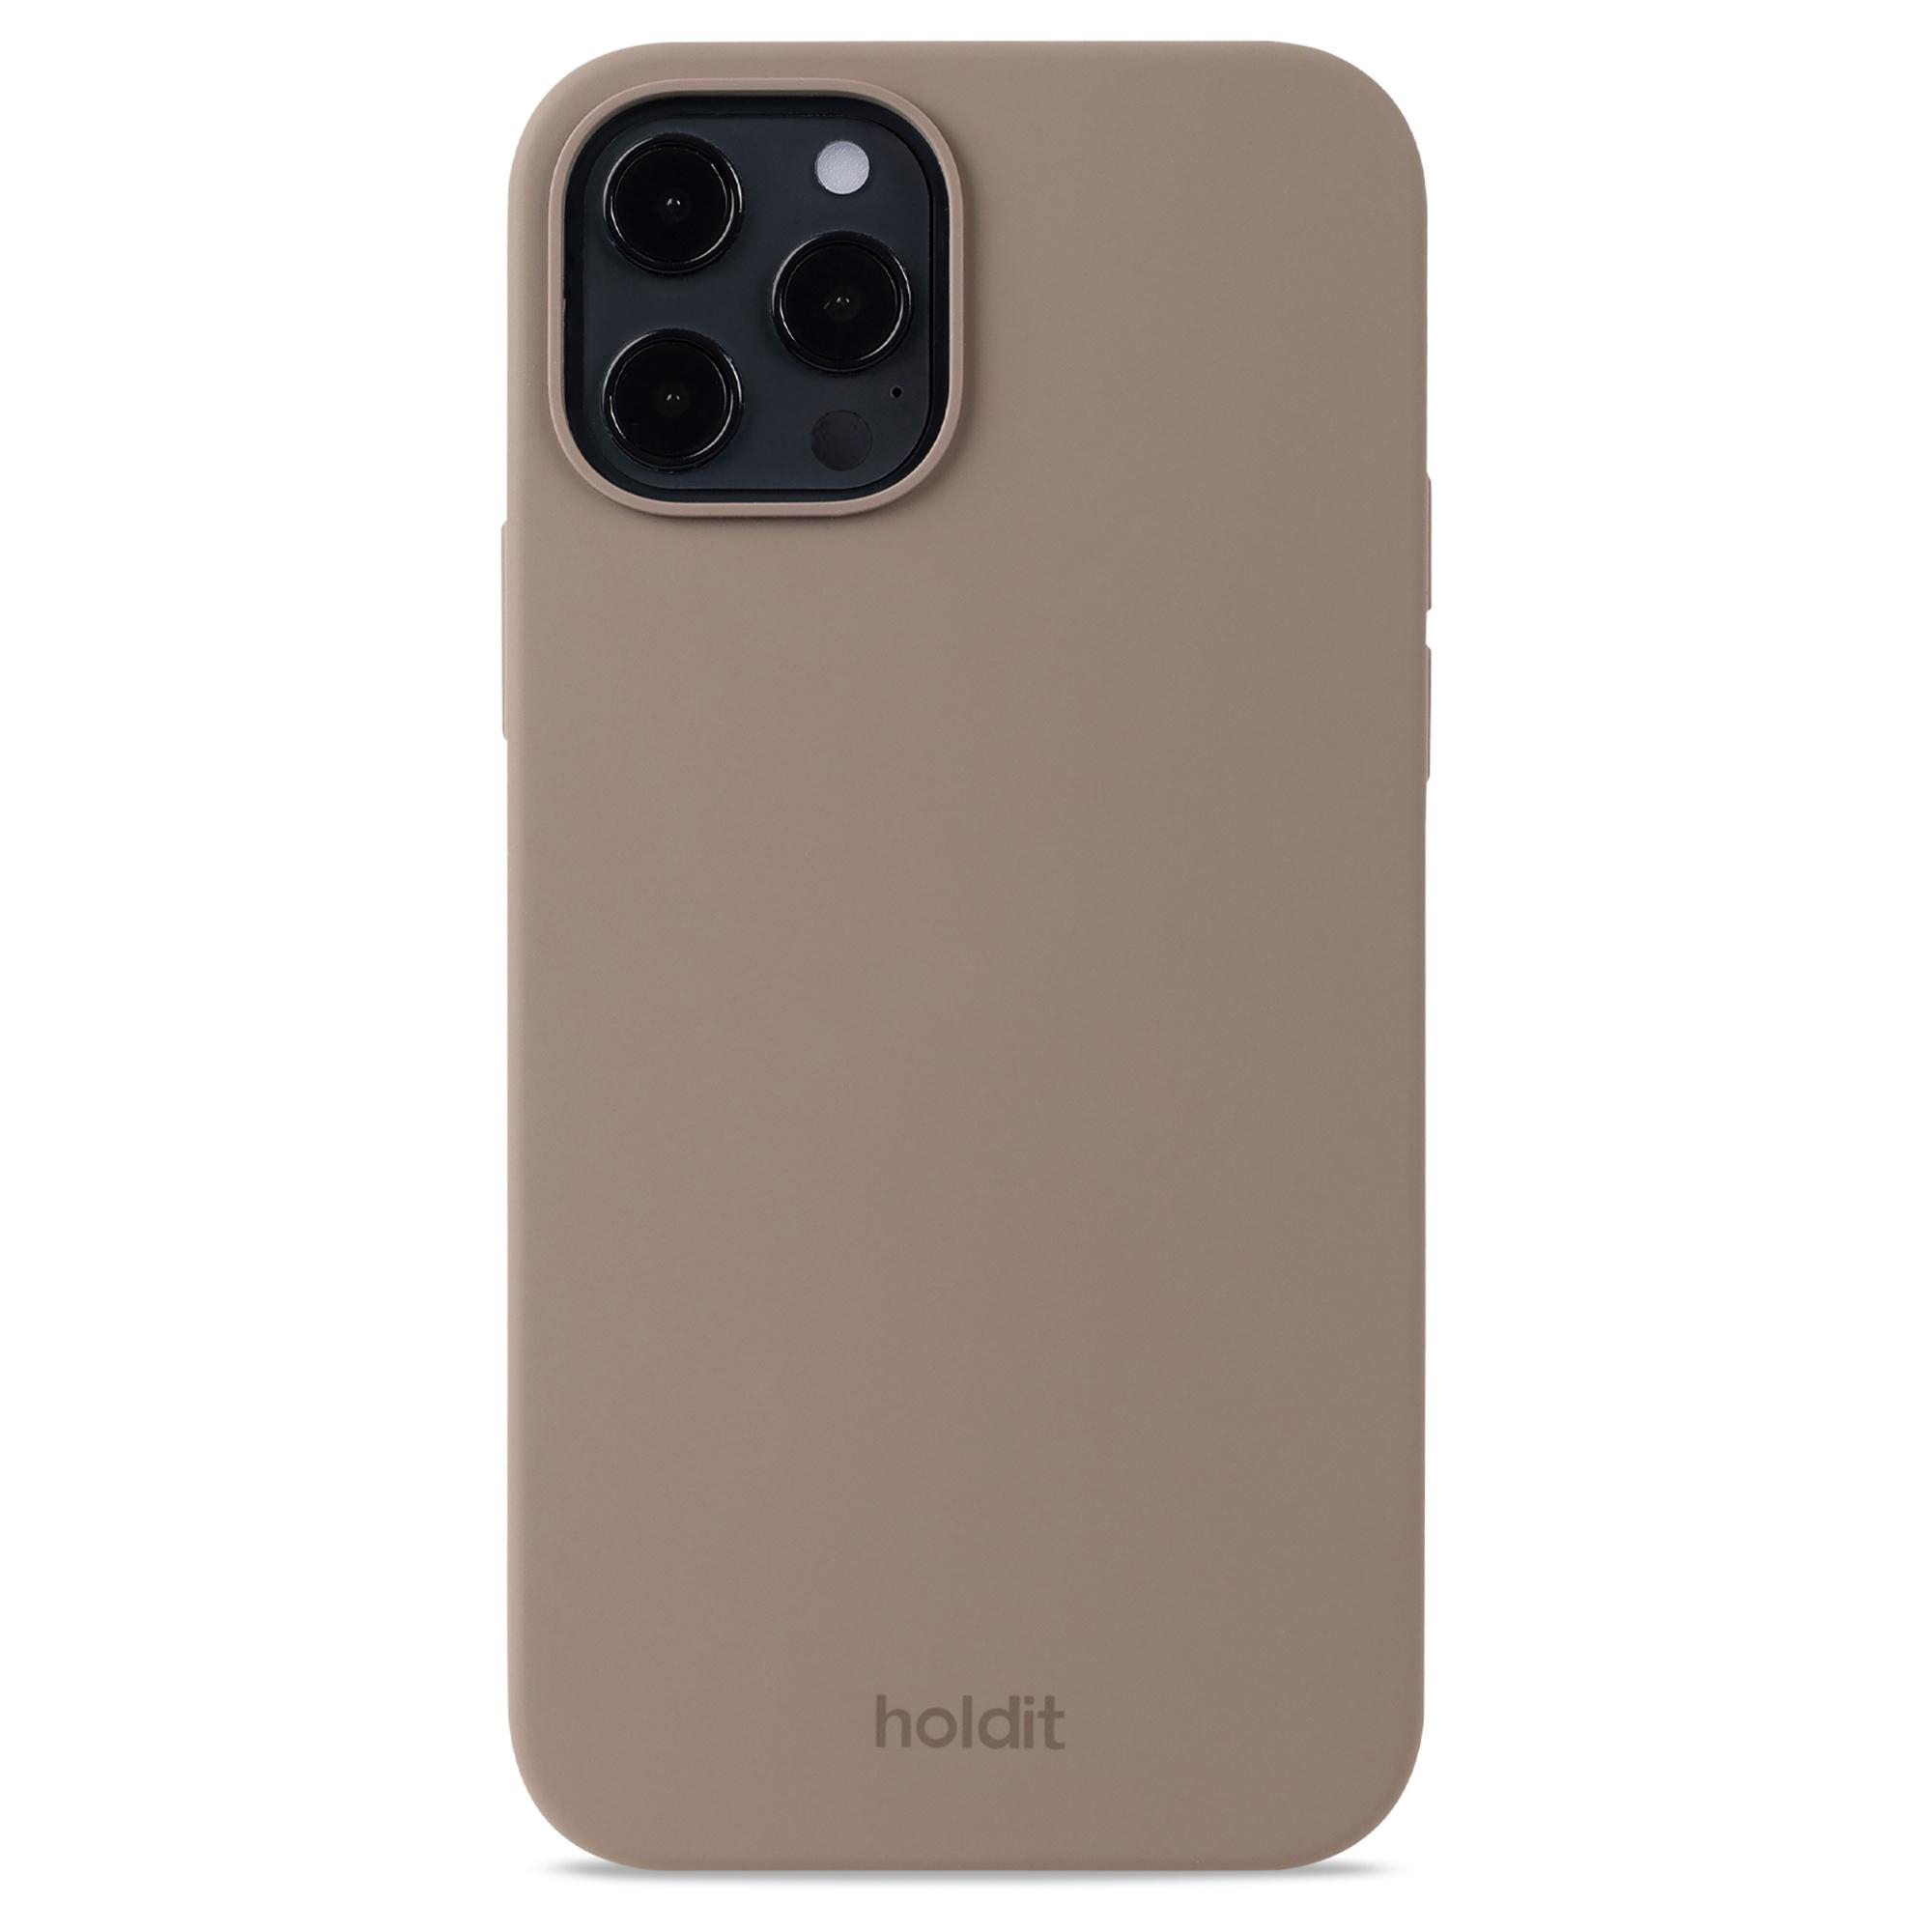 Mocha Apple, Pro, HOLDIT Case, 12/12 Silicone iPhone Backcover, Brown